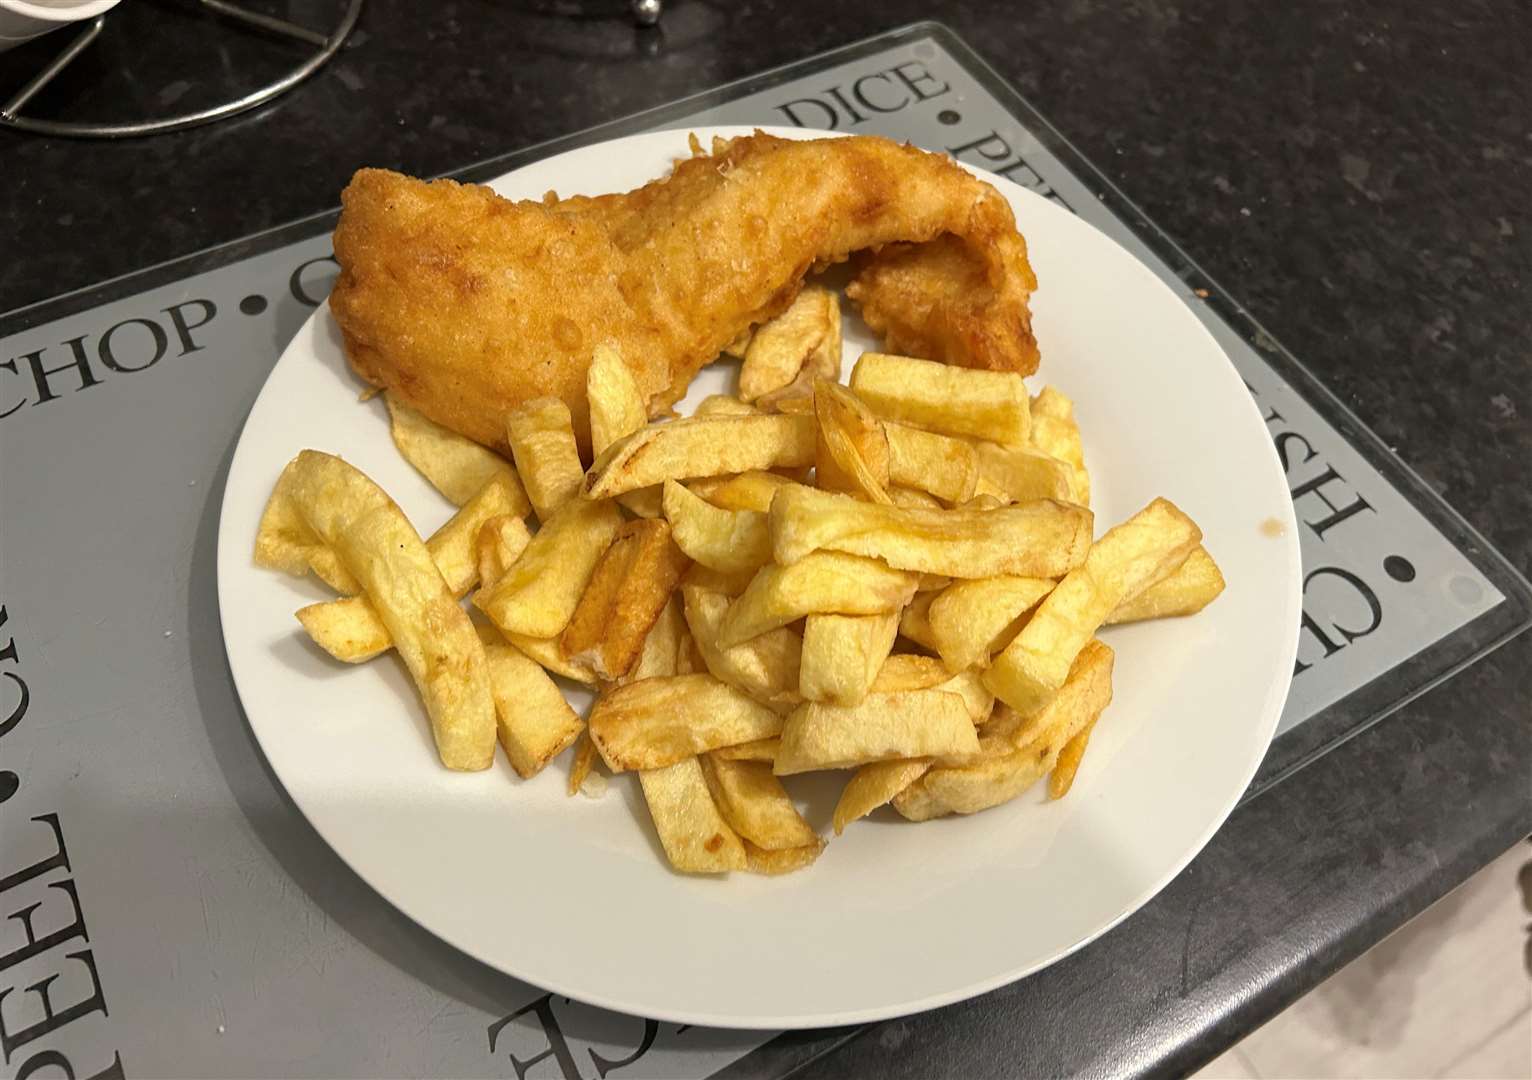 Cod and chips from the Torbay in Hythe cost £8.50